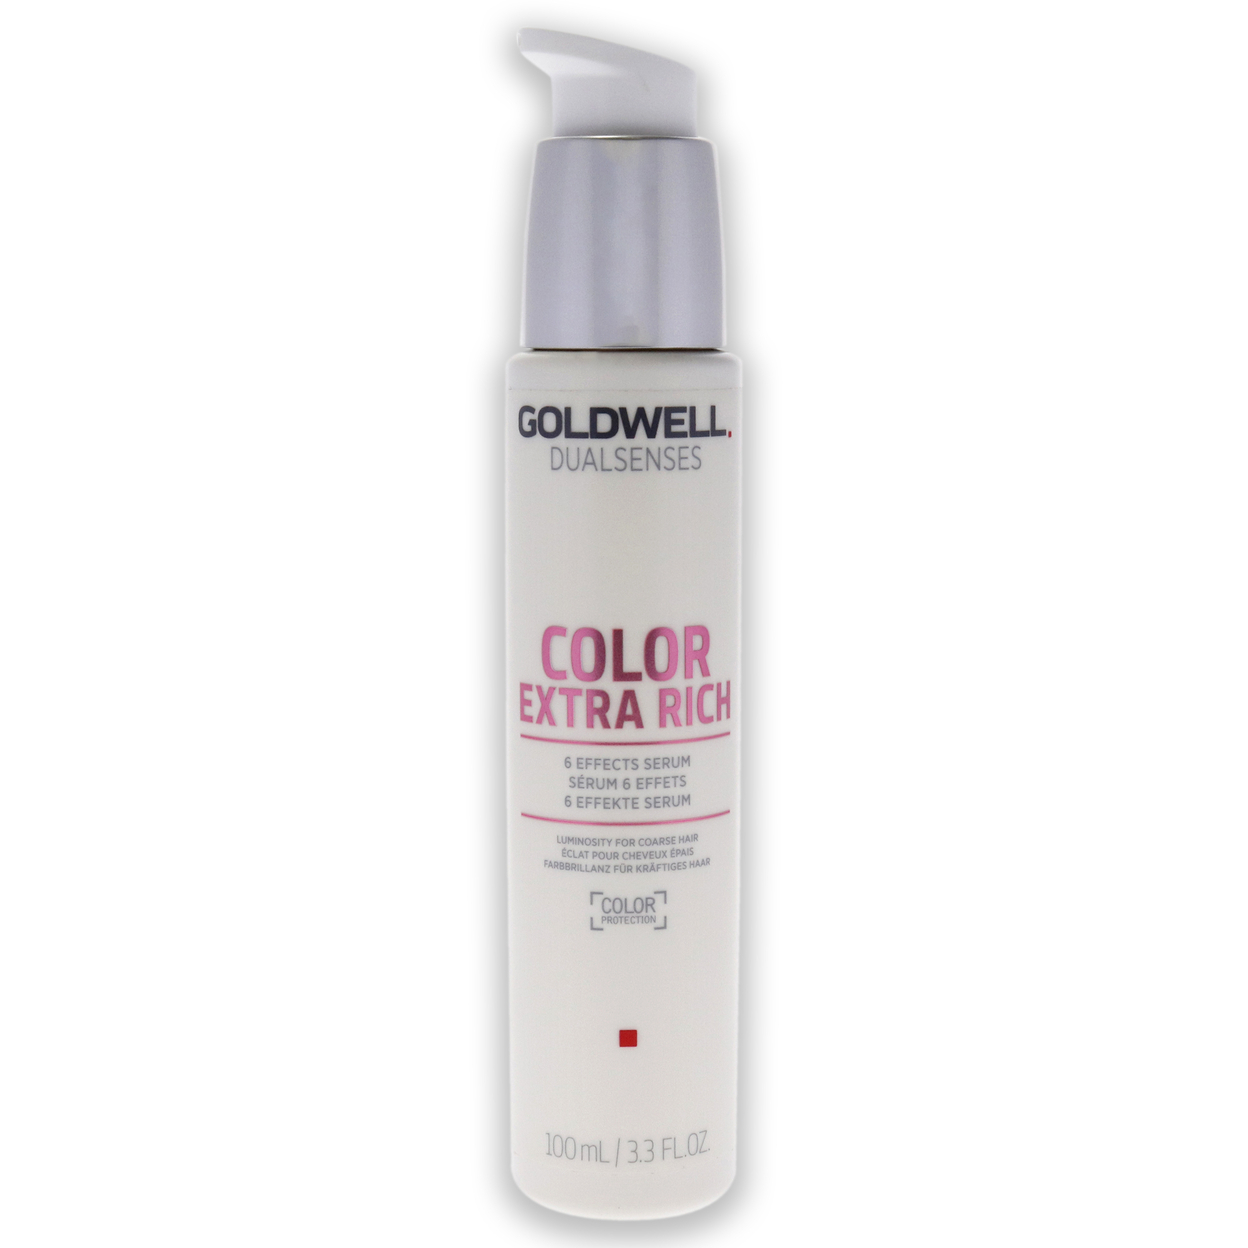 Goldwell Unisex HAIRCARE DualSenses Color Extra Rich 6 Effects Serum 3.3 Oz